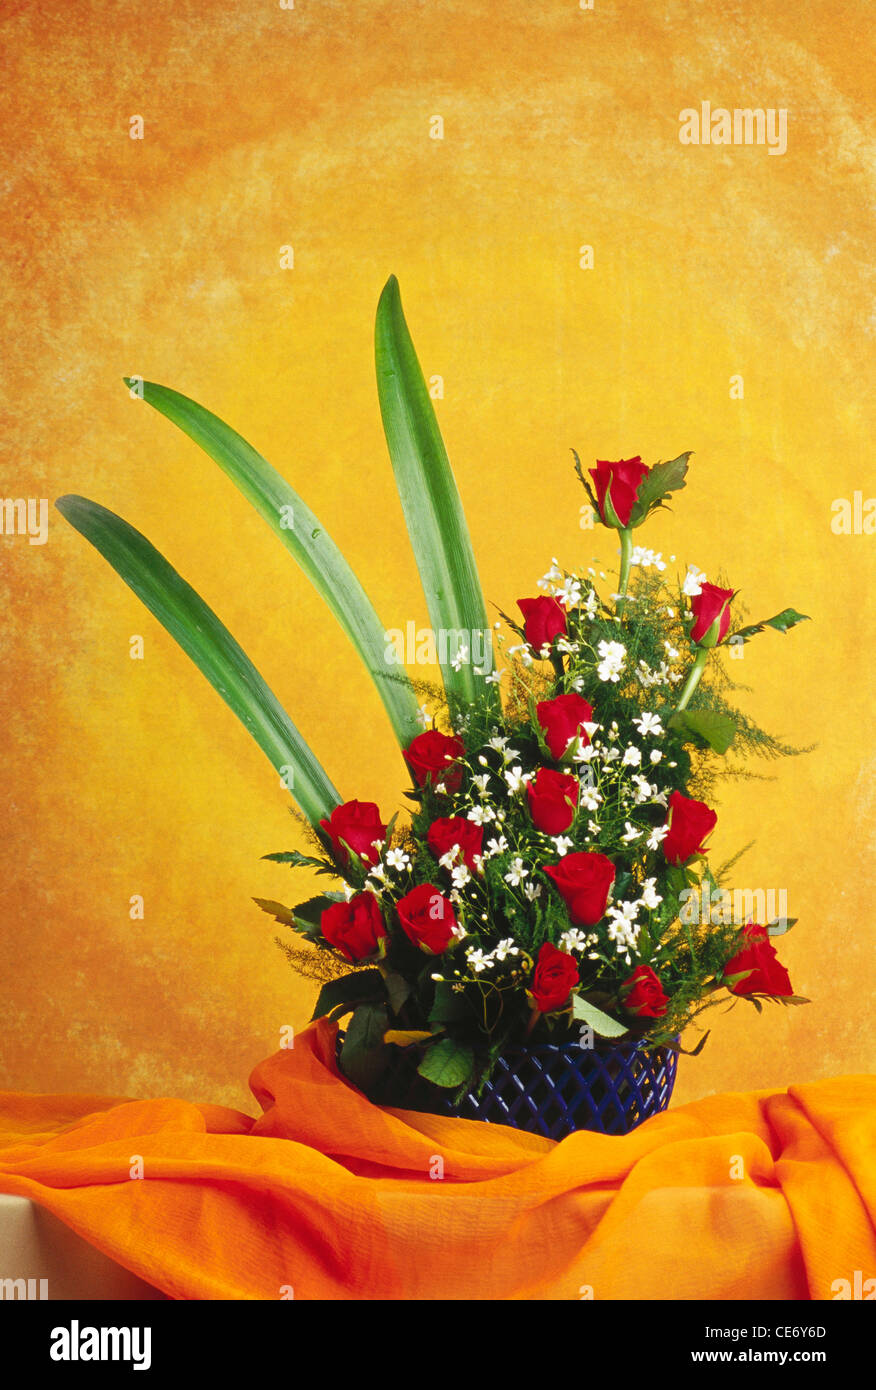 BDR 86330 : artificial flowers arrangement of red roses Stock Photo